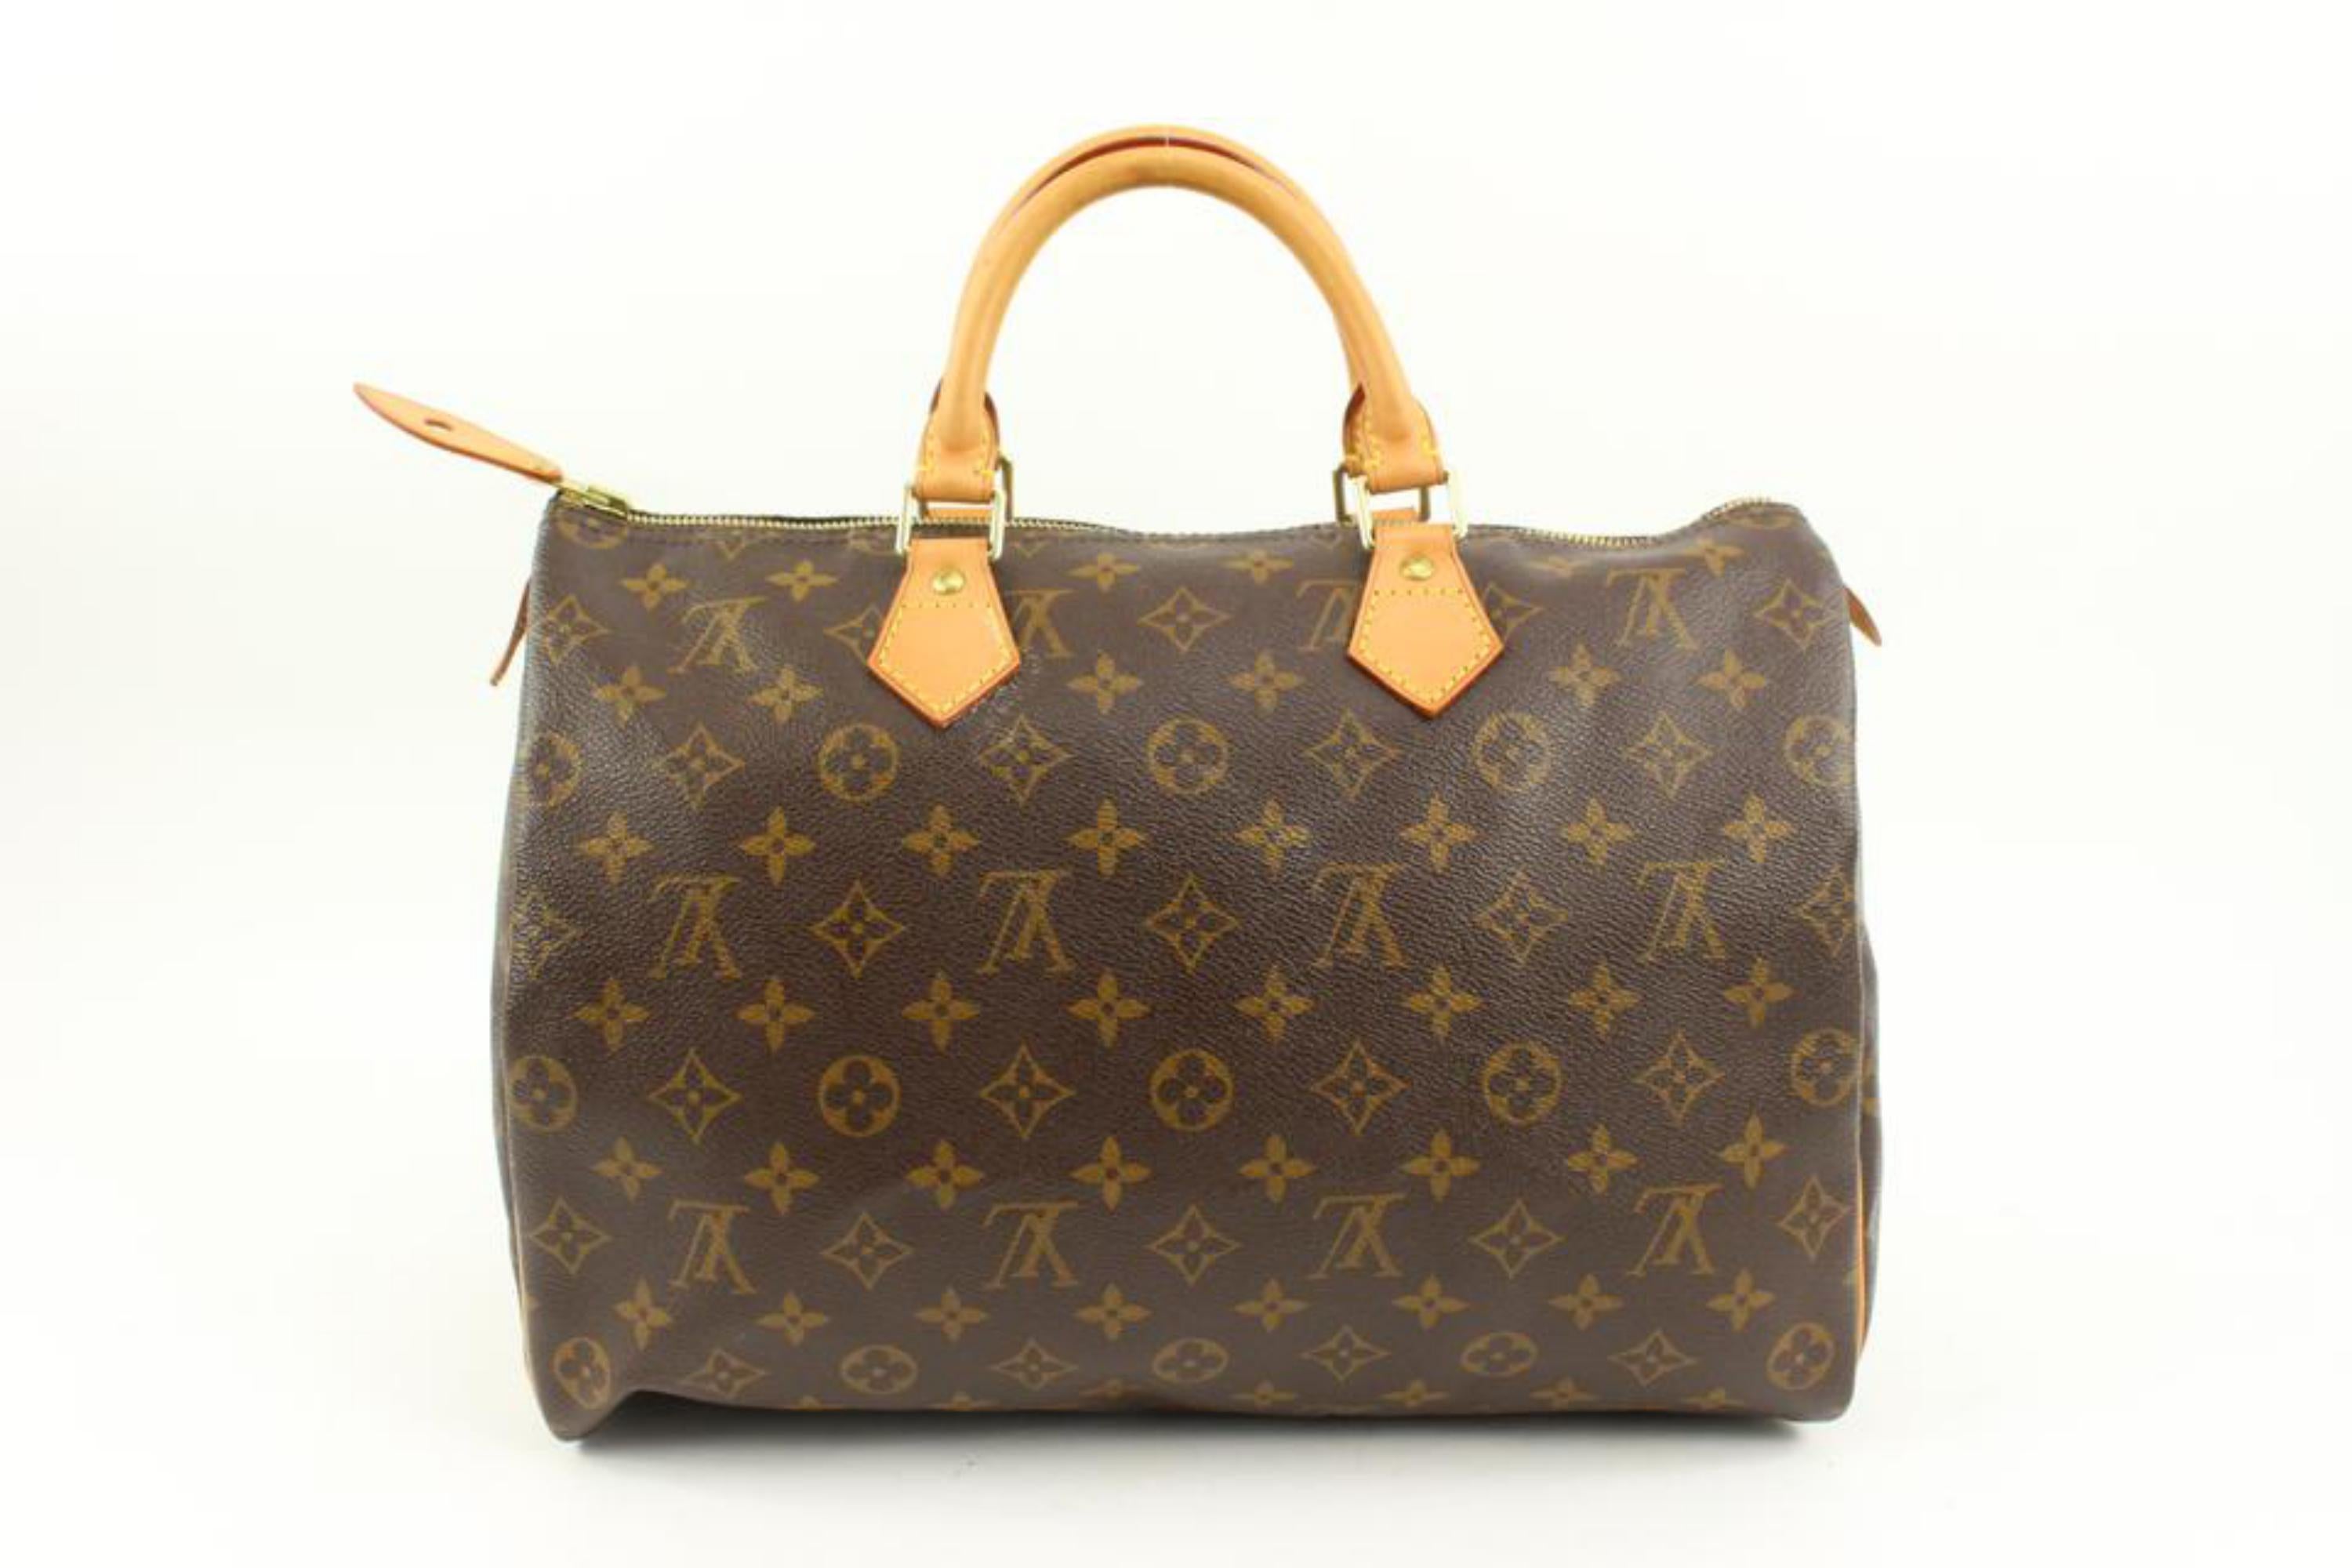 Louis Vuitton Monogram Speedy 35 Boston Bag MM 32lv223s In Good Condition For Sale In Dix hills, NY